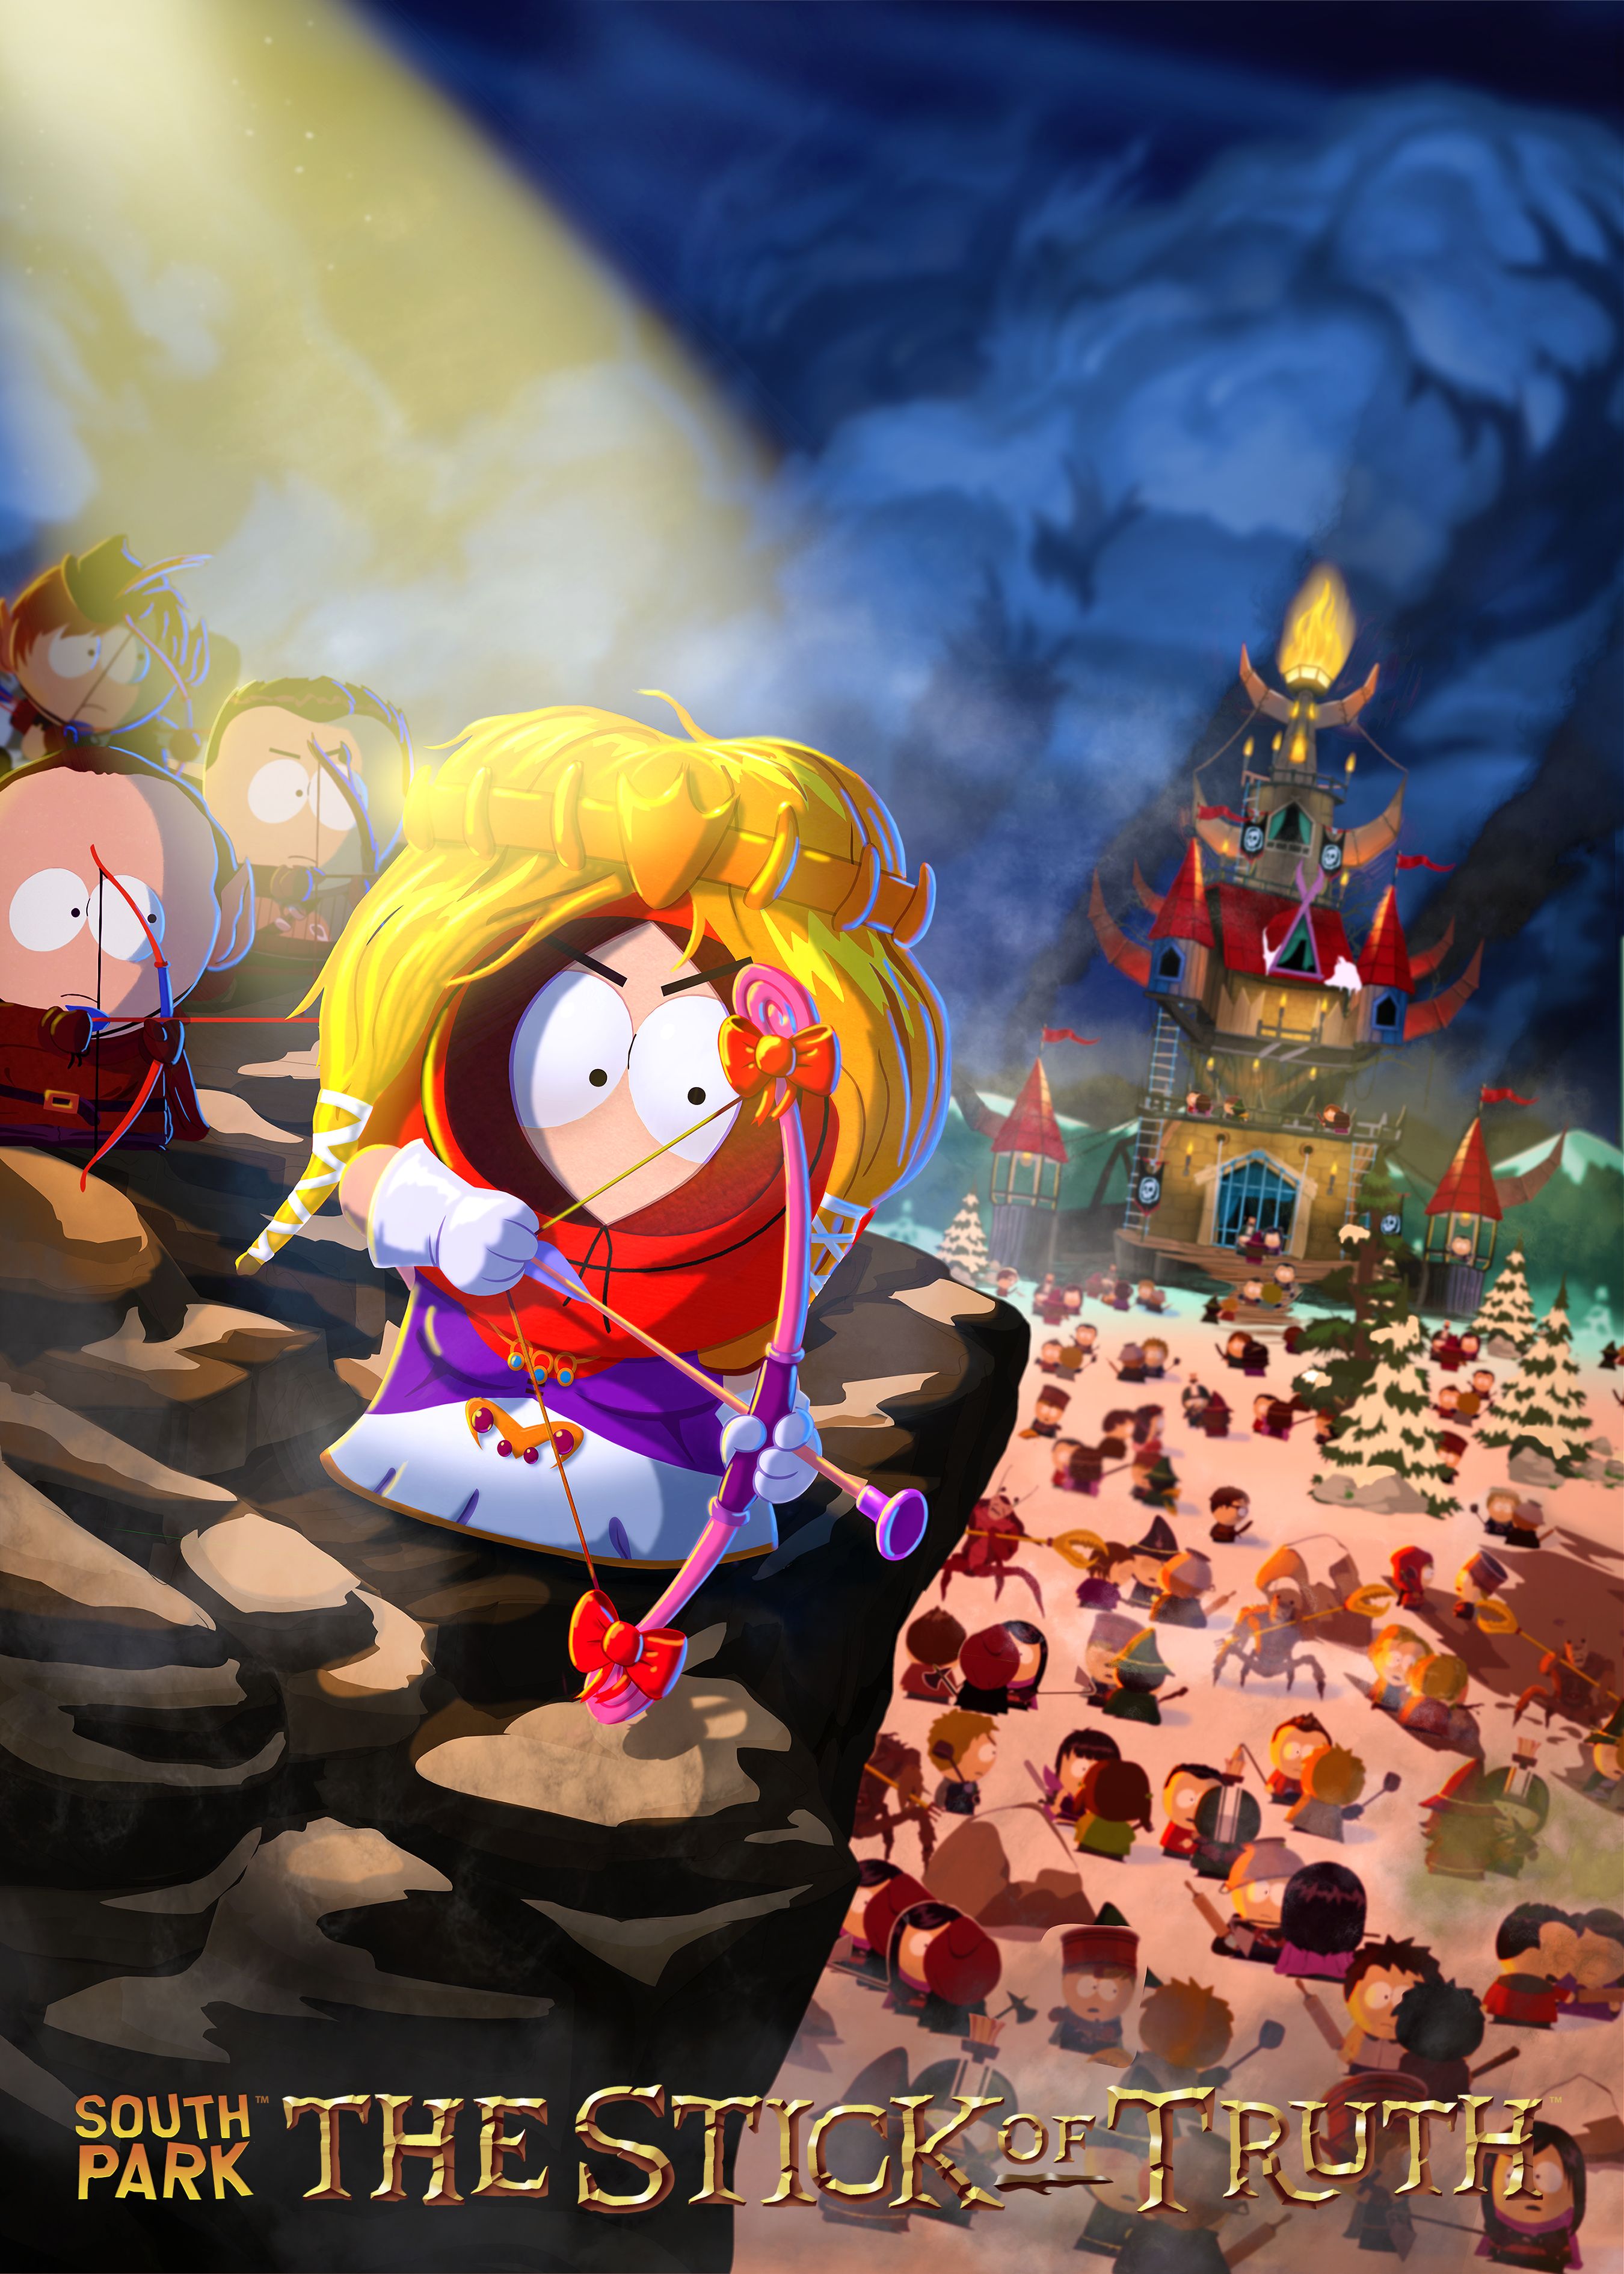 Amazoncom: South Park: The Stick of Truth - Ultimate